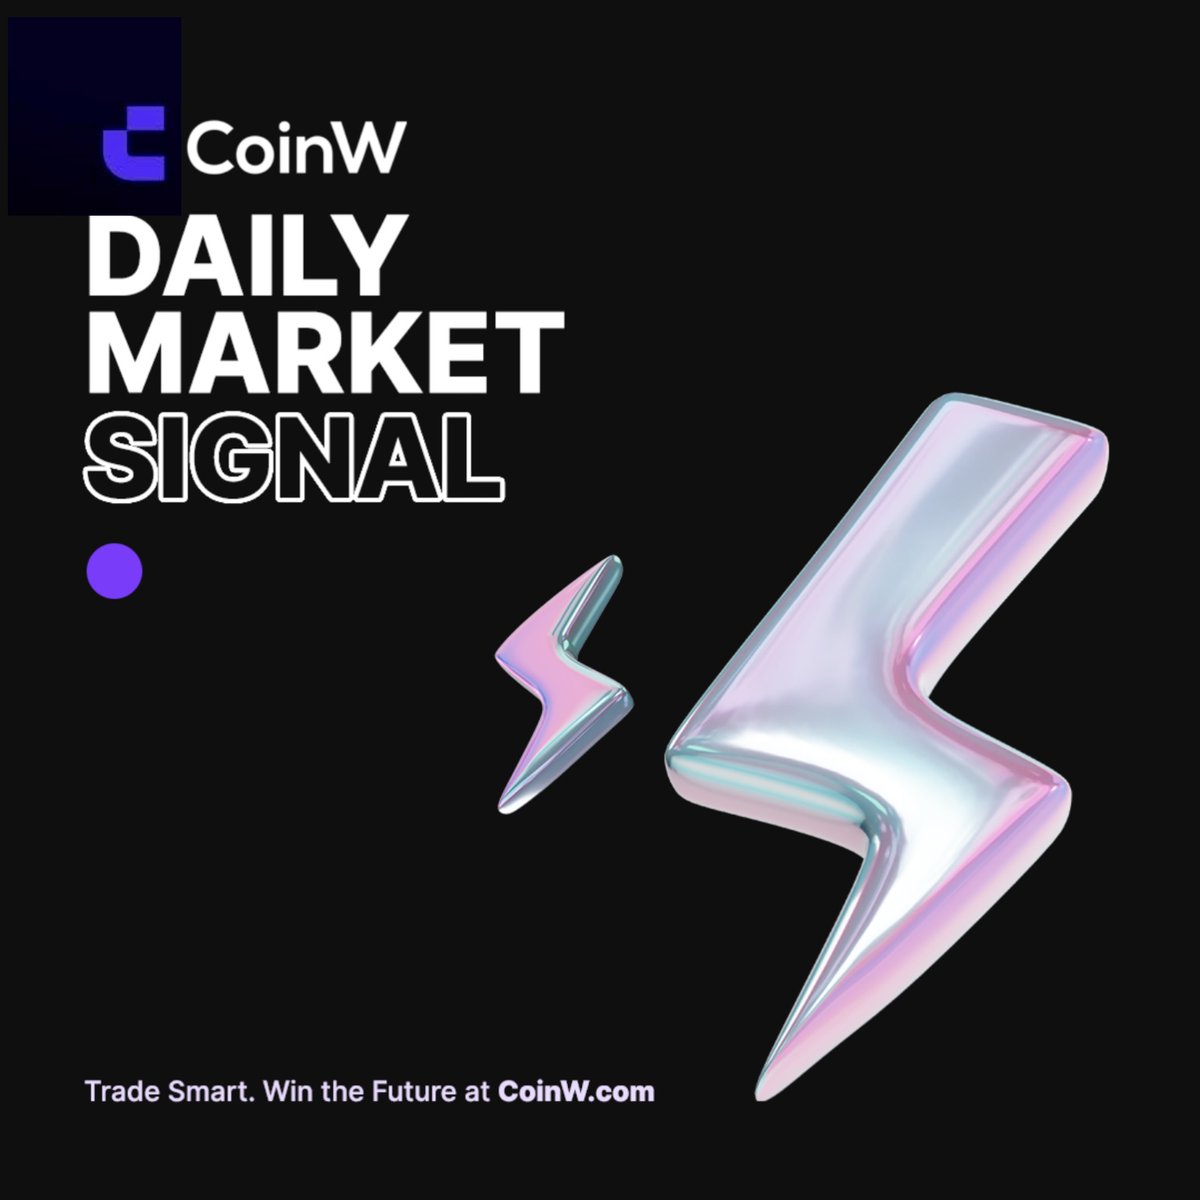 📶 Daily Market Update 🚀 zkSync v24 mains upgrade expected around 16:00 on May 16th. 🚀 Tornado Cash co-creator Alexey Pertsev sentenced to 64 months in prison by Dutch Court. 🚀 #Runestone floor price falls below 0.01 $BTC.